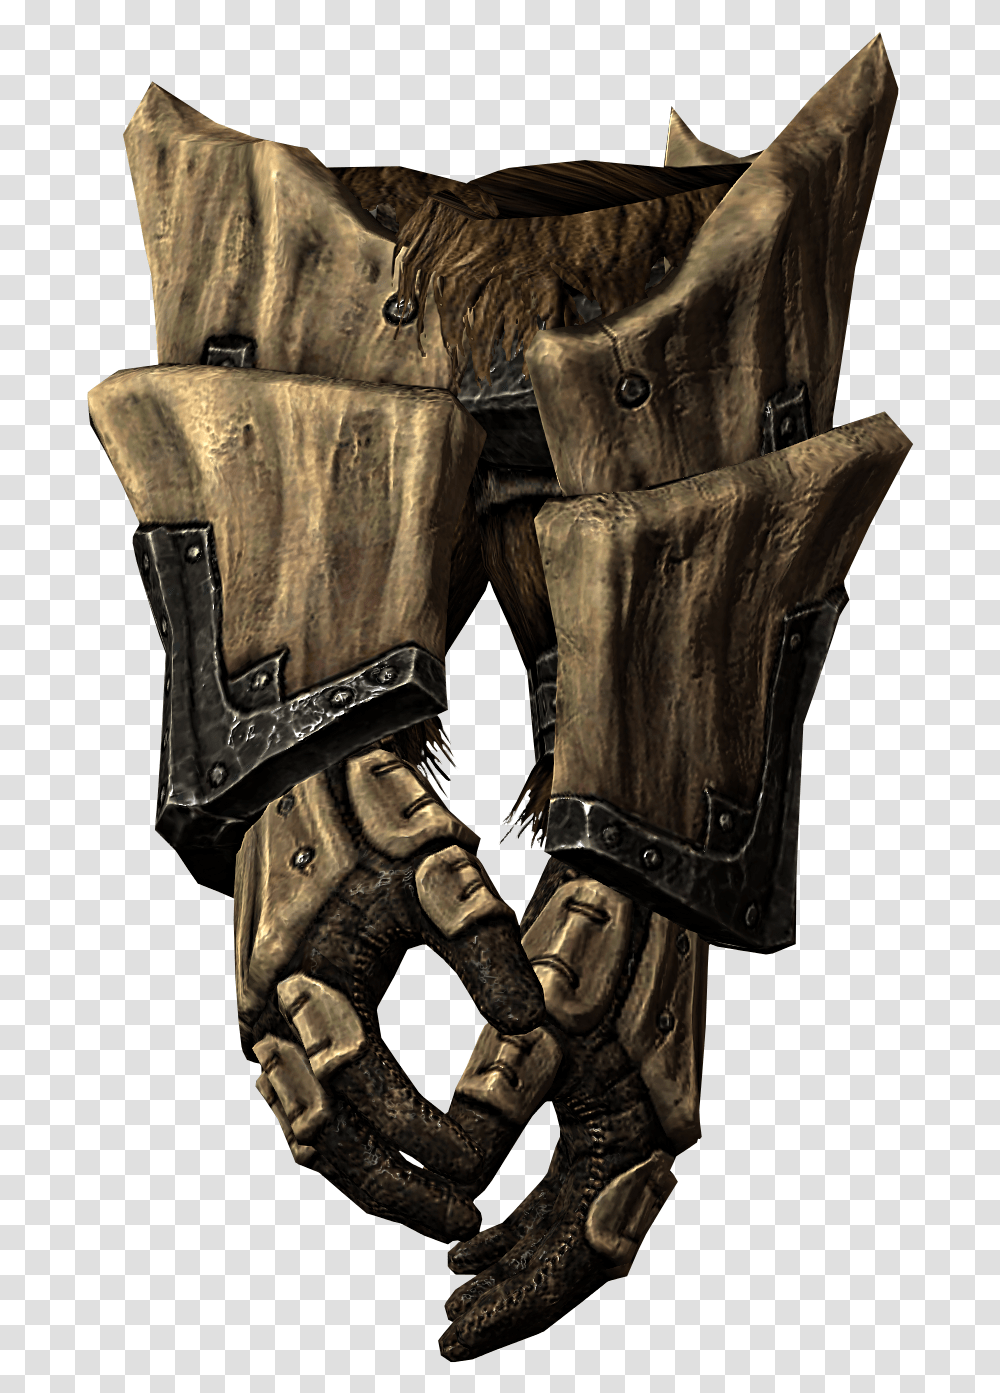 Download Hd Dragonplate Gauntlets Armor Gloves Icon Dragon Armor Skyrim, Clothing, Apparel, Bronze, Knight Transparent Png